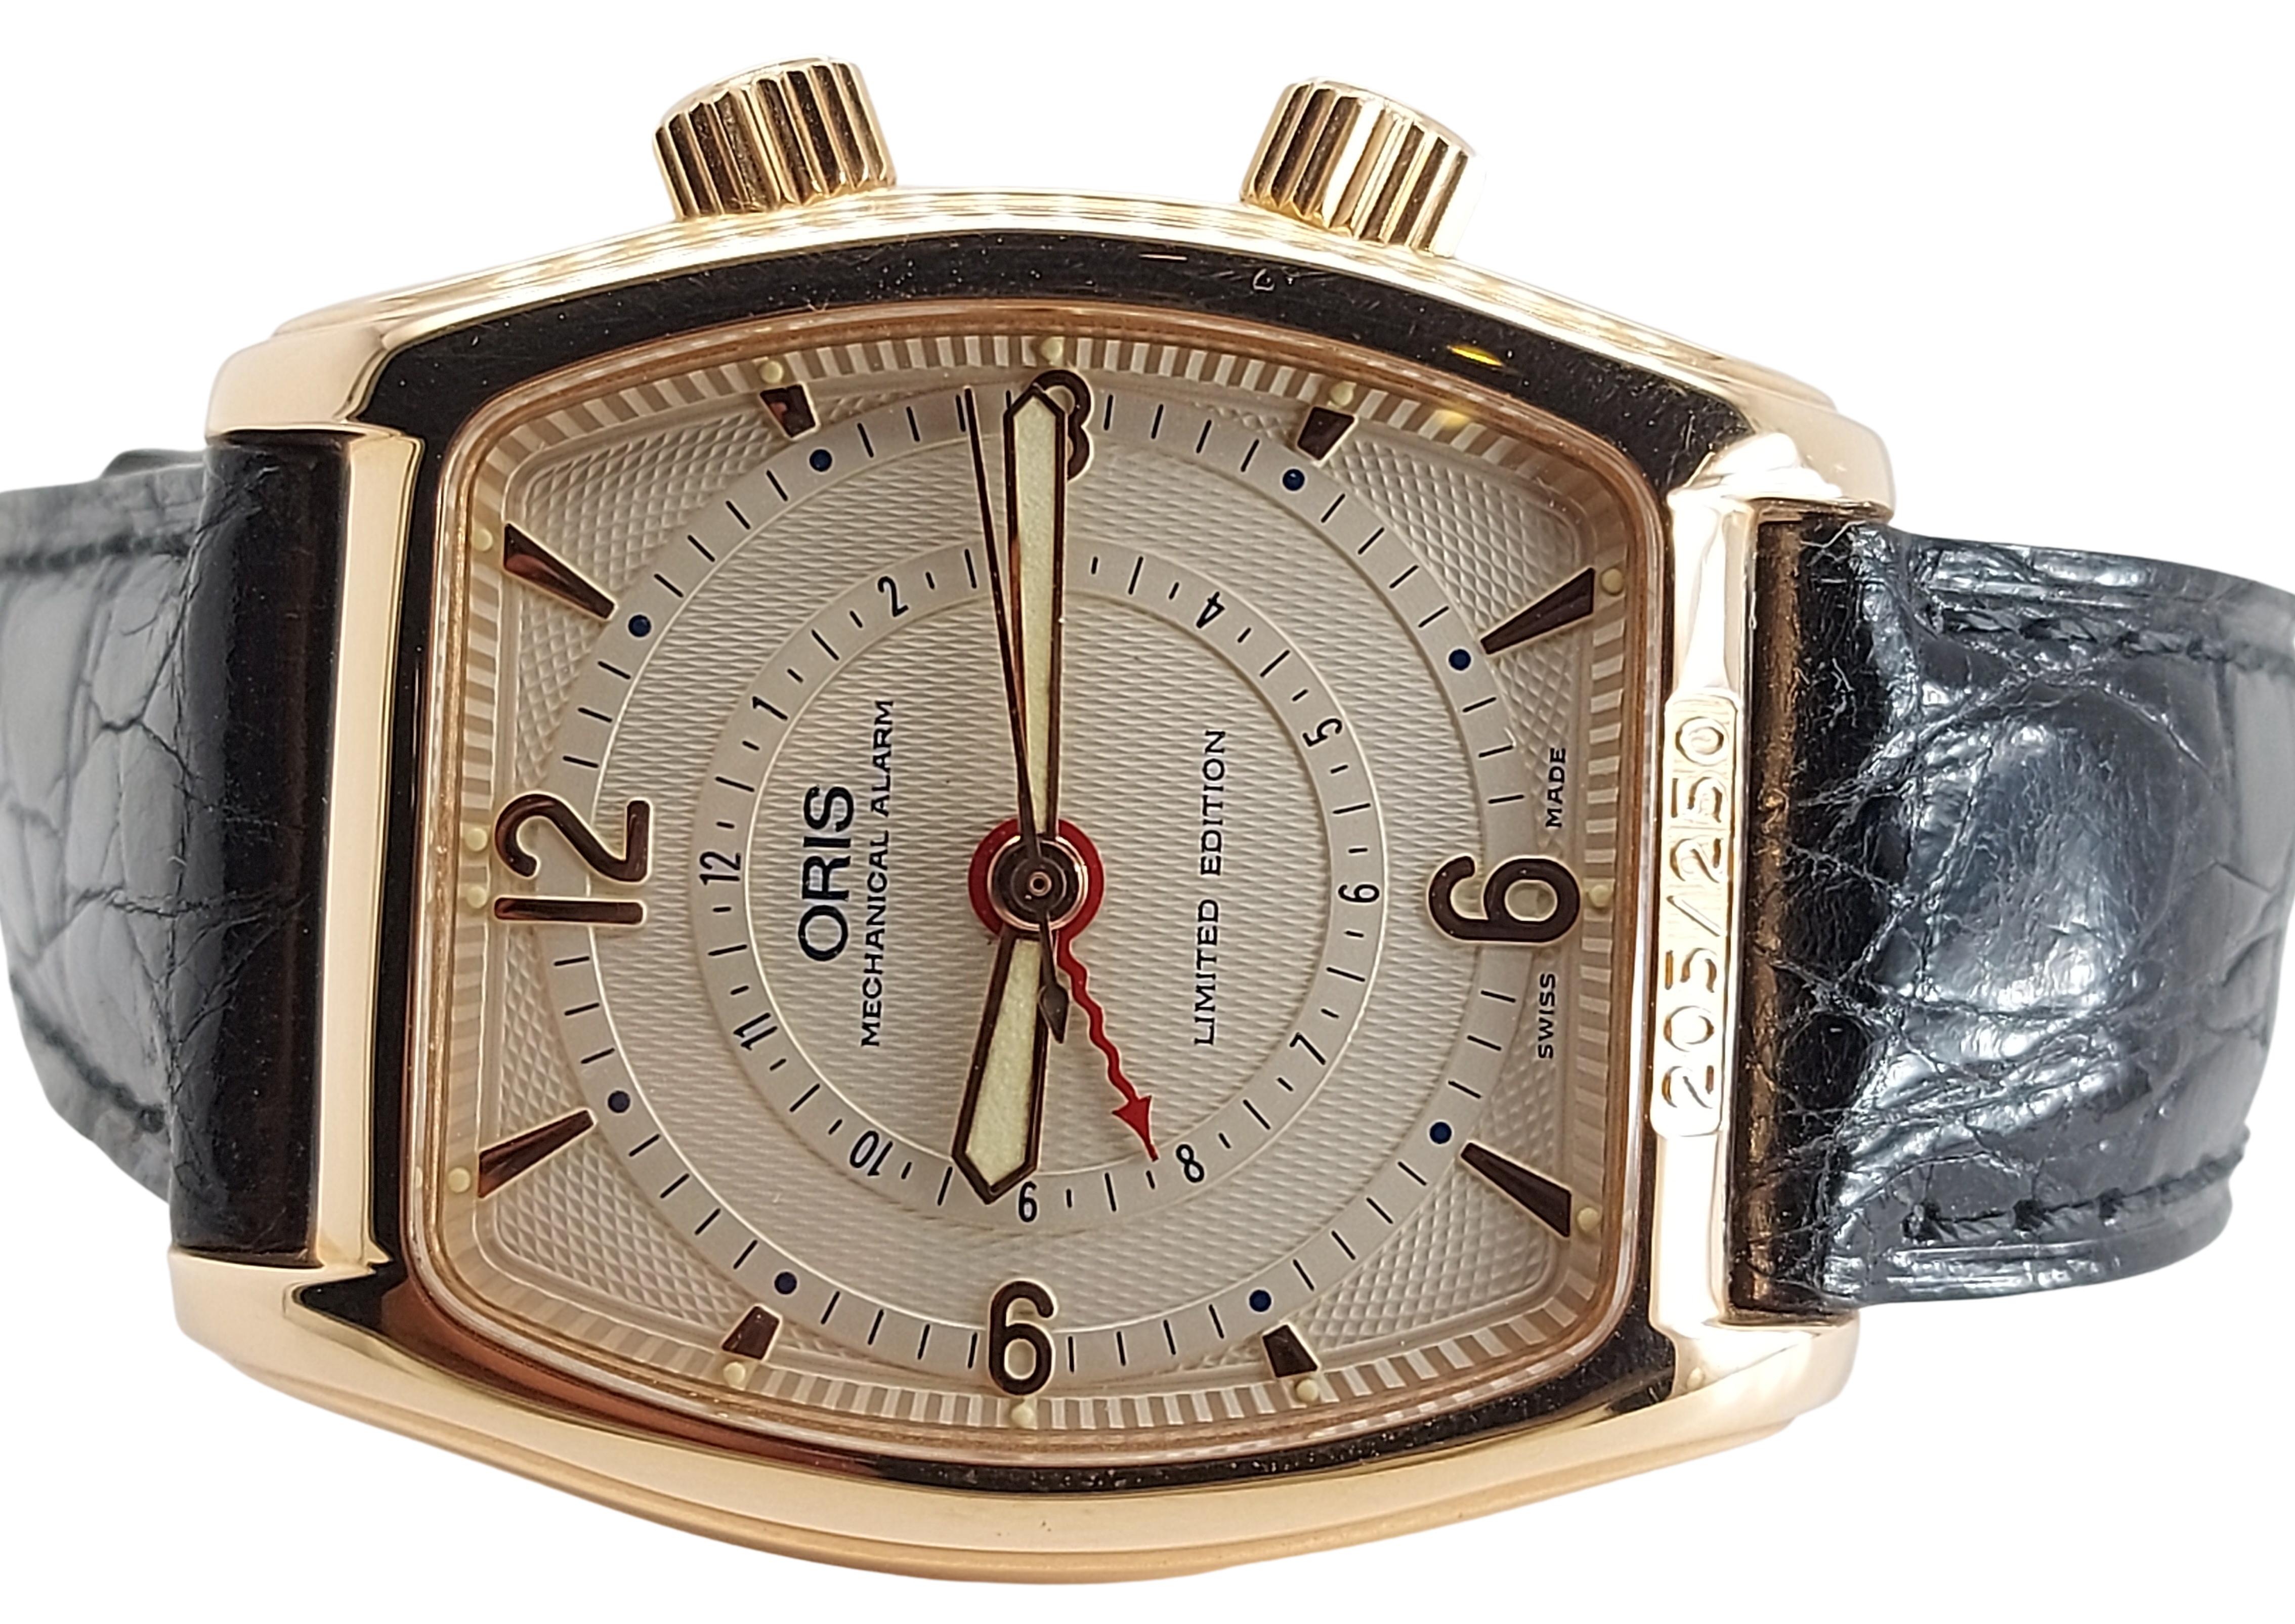 ORIS Reveil Limited Edition Mechanical Alarm in 18kt Gold, Brand New With Box And Warranty Papers

Limited edition to 250 pieces

Reference number: 419 7479 60 61

Movement: Mechanical with manual winding

Functions: Hours, minutes, sweep seconds;